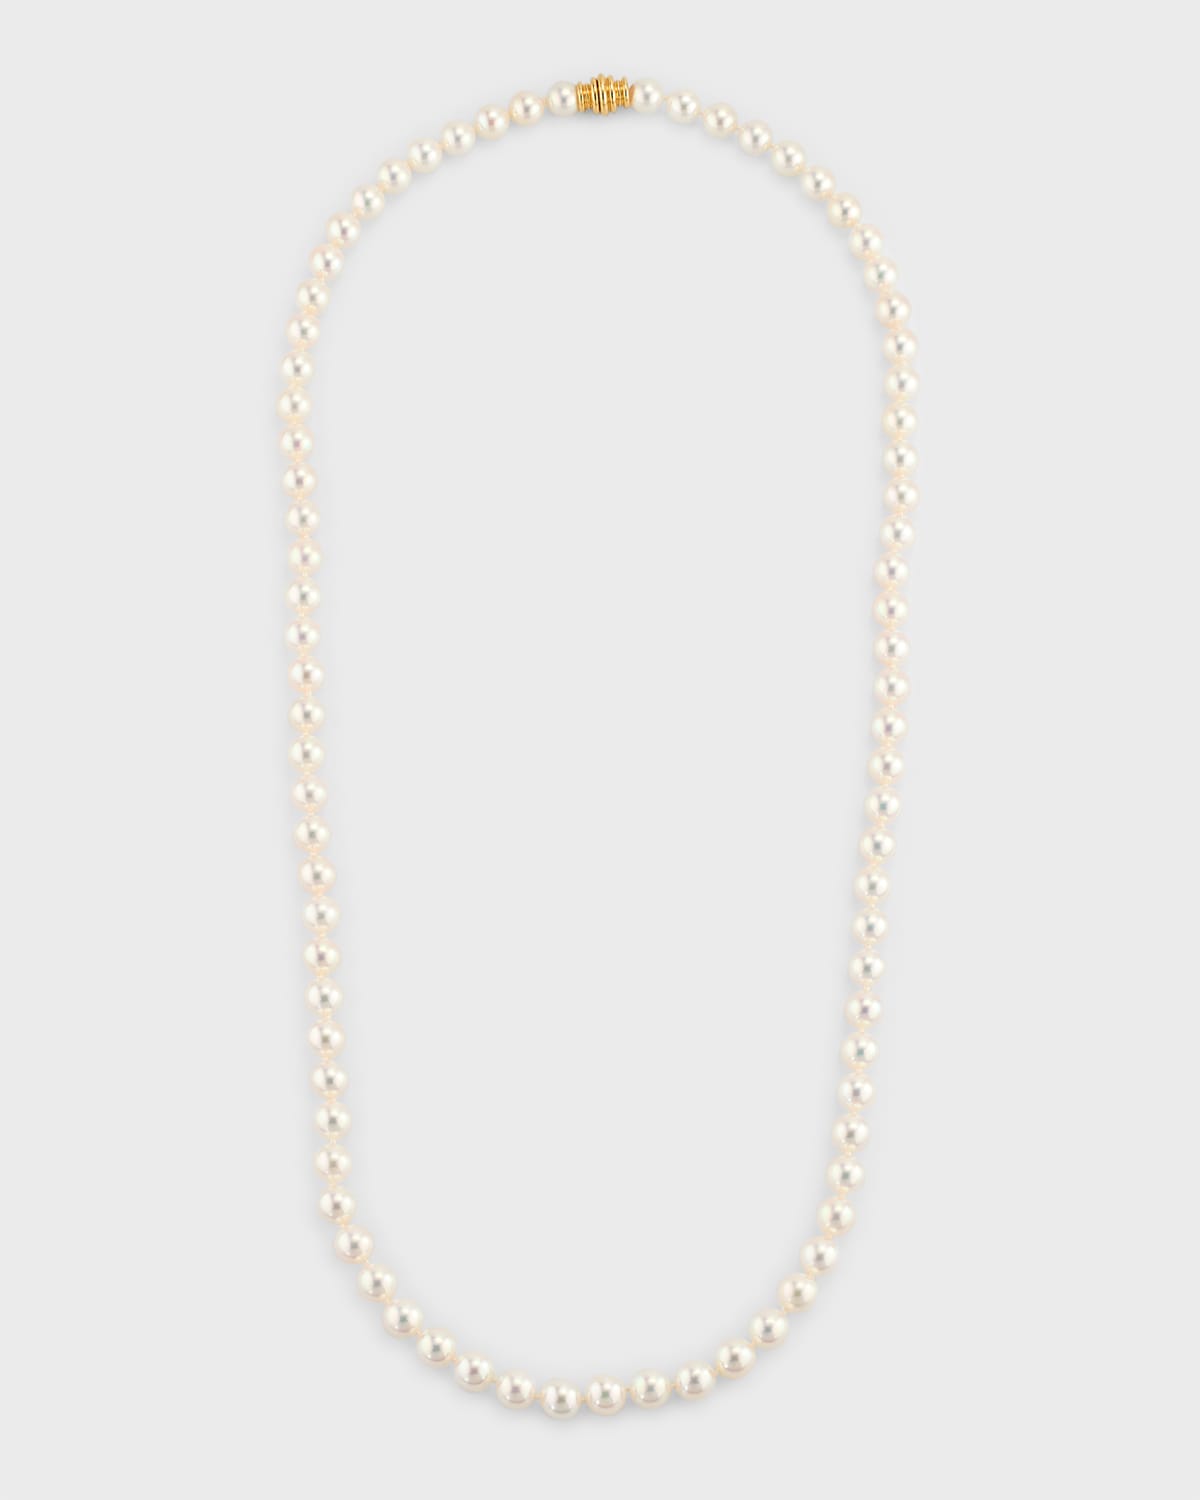 26" Akoya Cultured 8mm Pearl Necklace with Yellow Gold Clasp